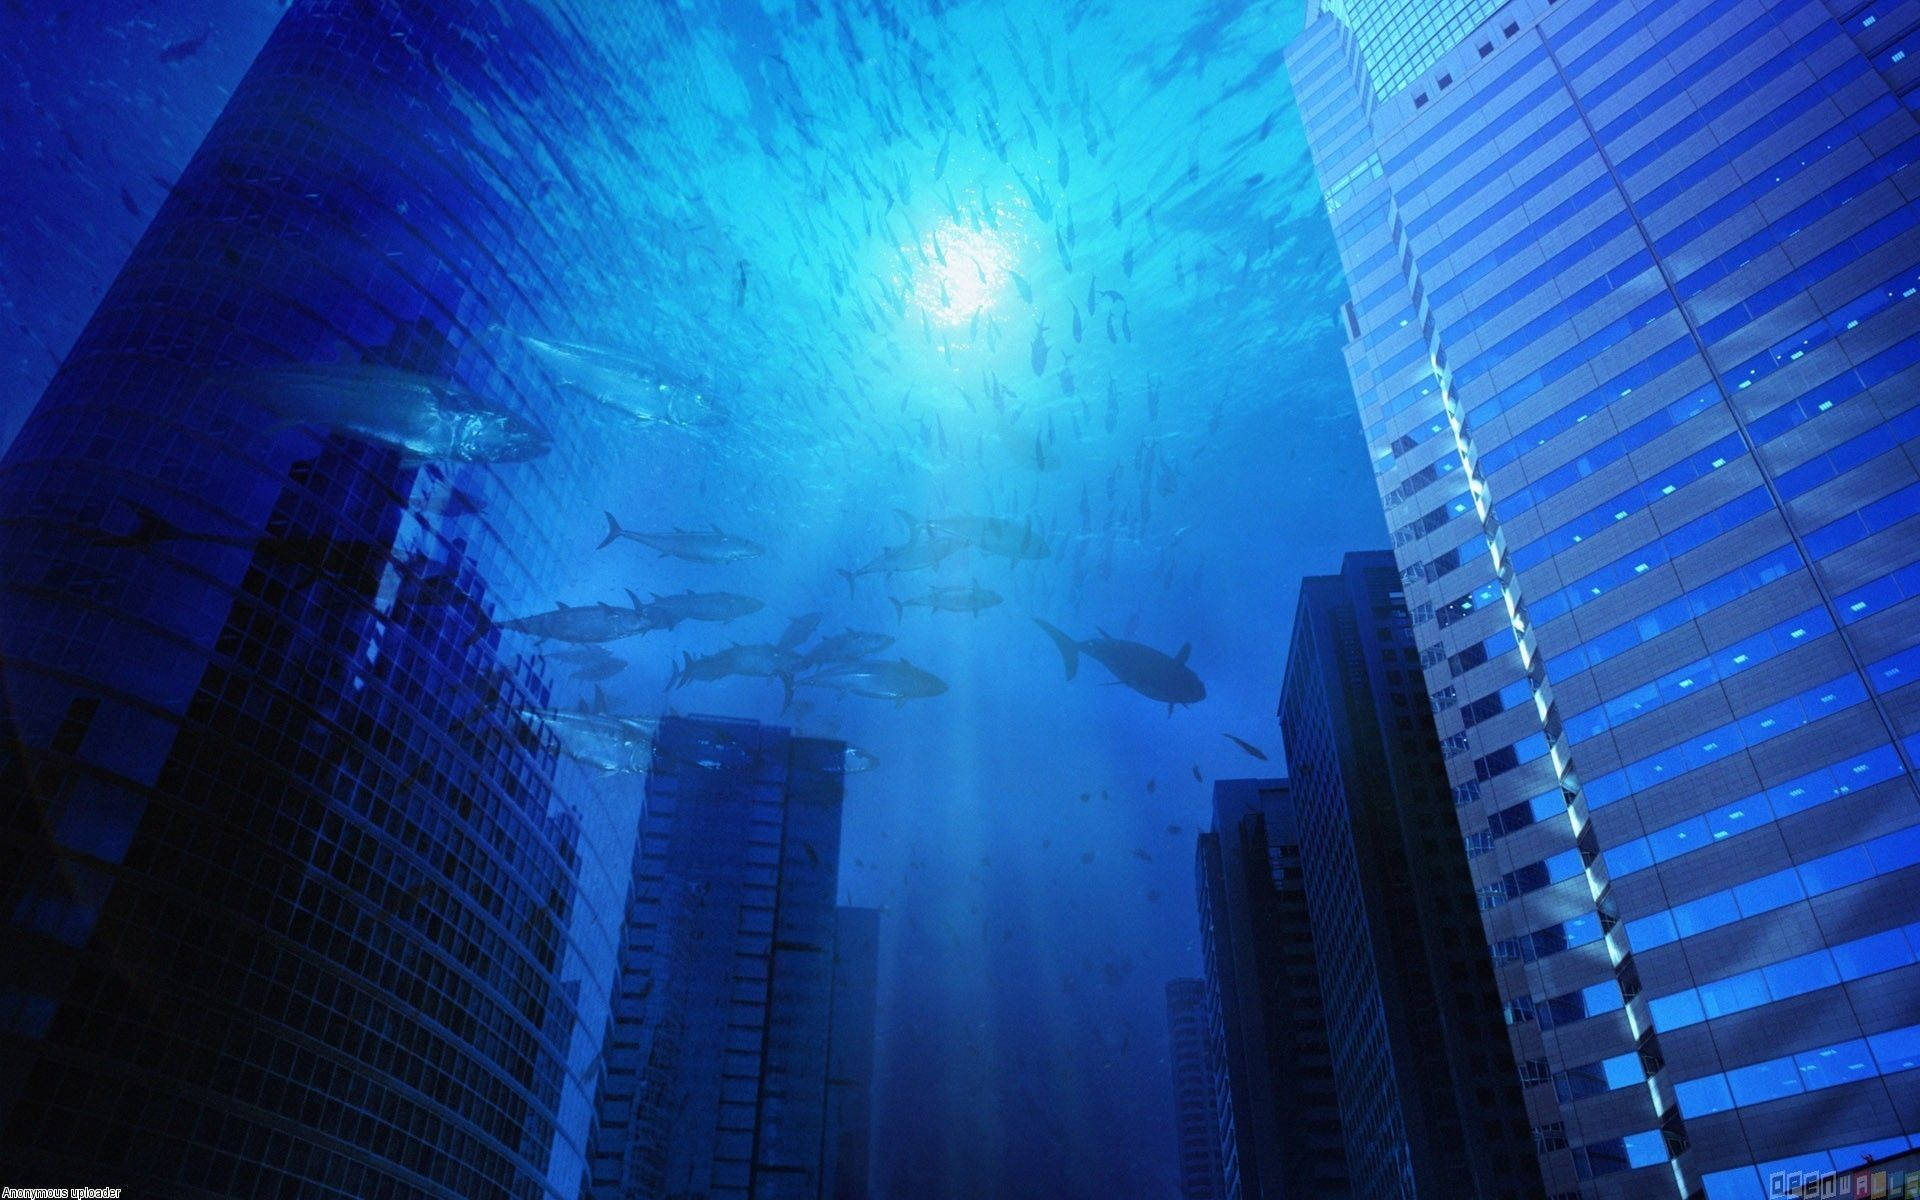 A city with tall buildings and fish swimming in the water - Underwater